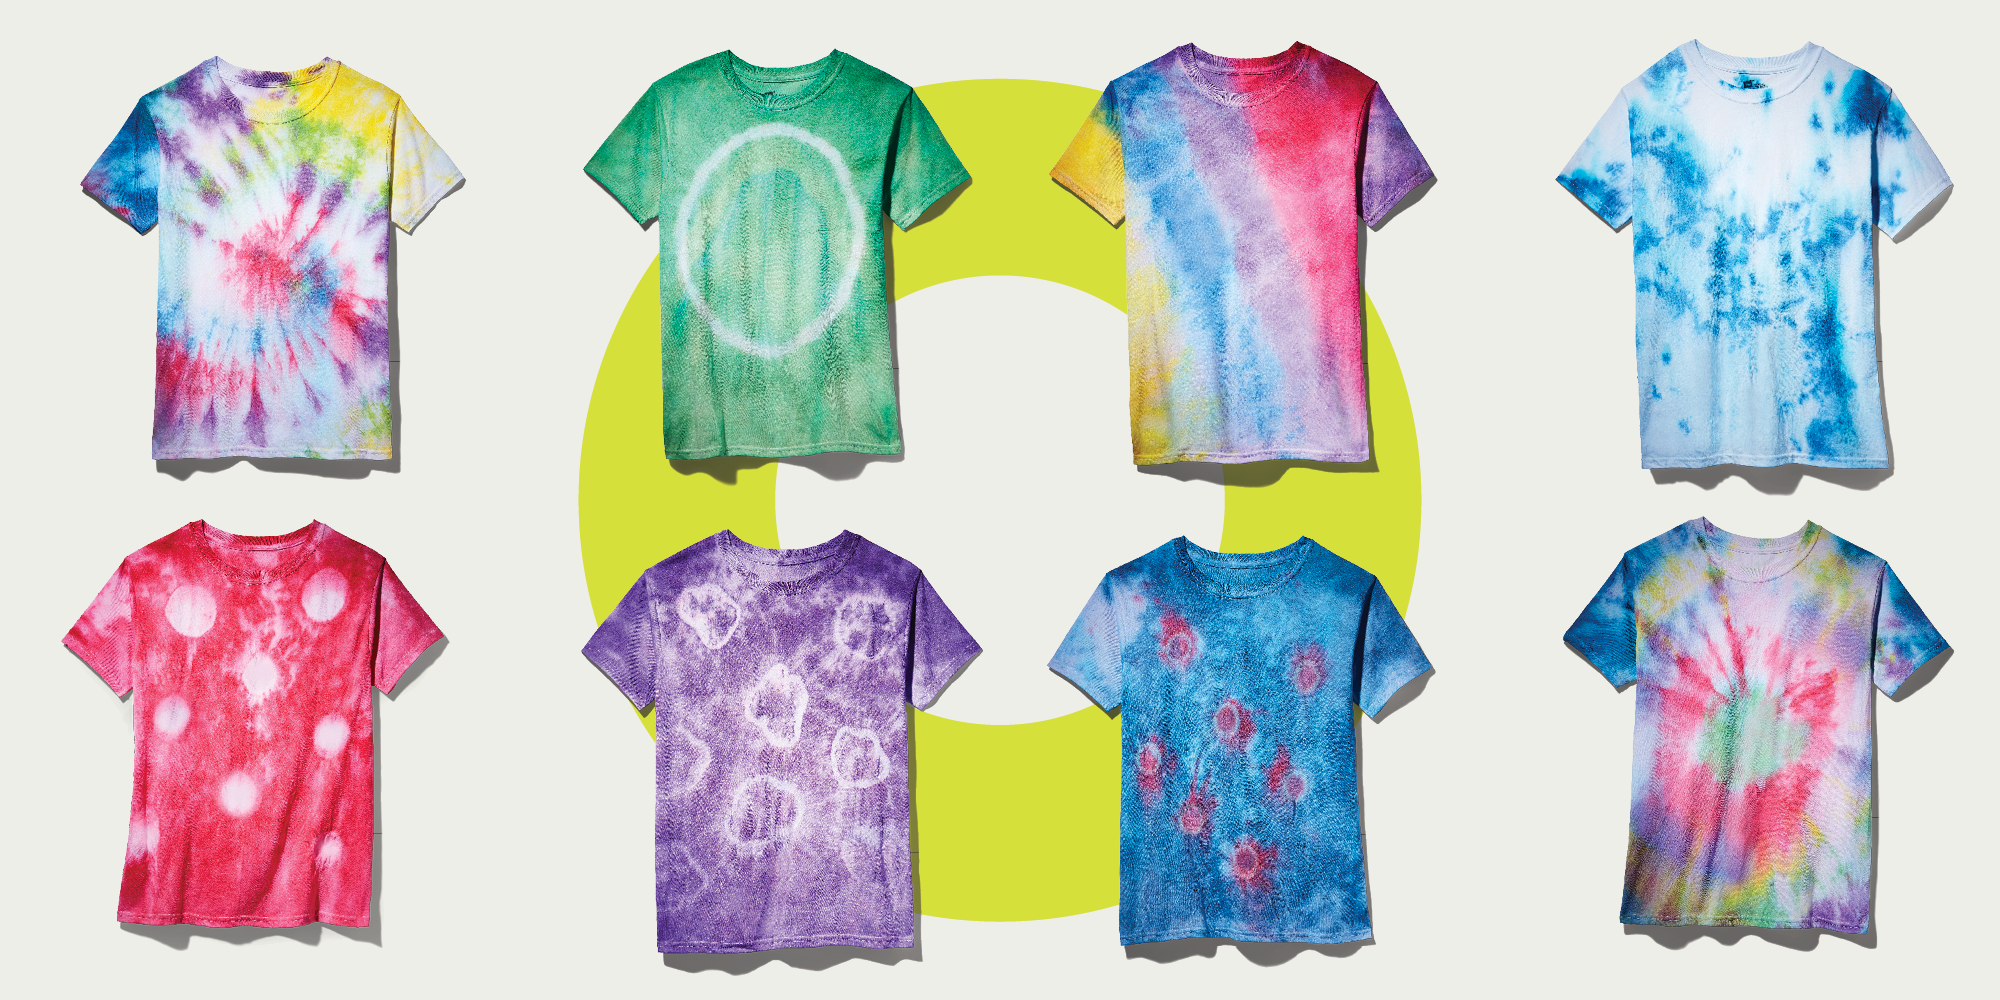 How To Tie Dye A Shirt 7 Patterns And